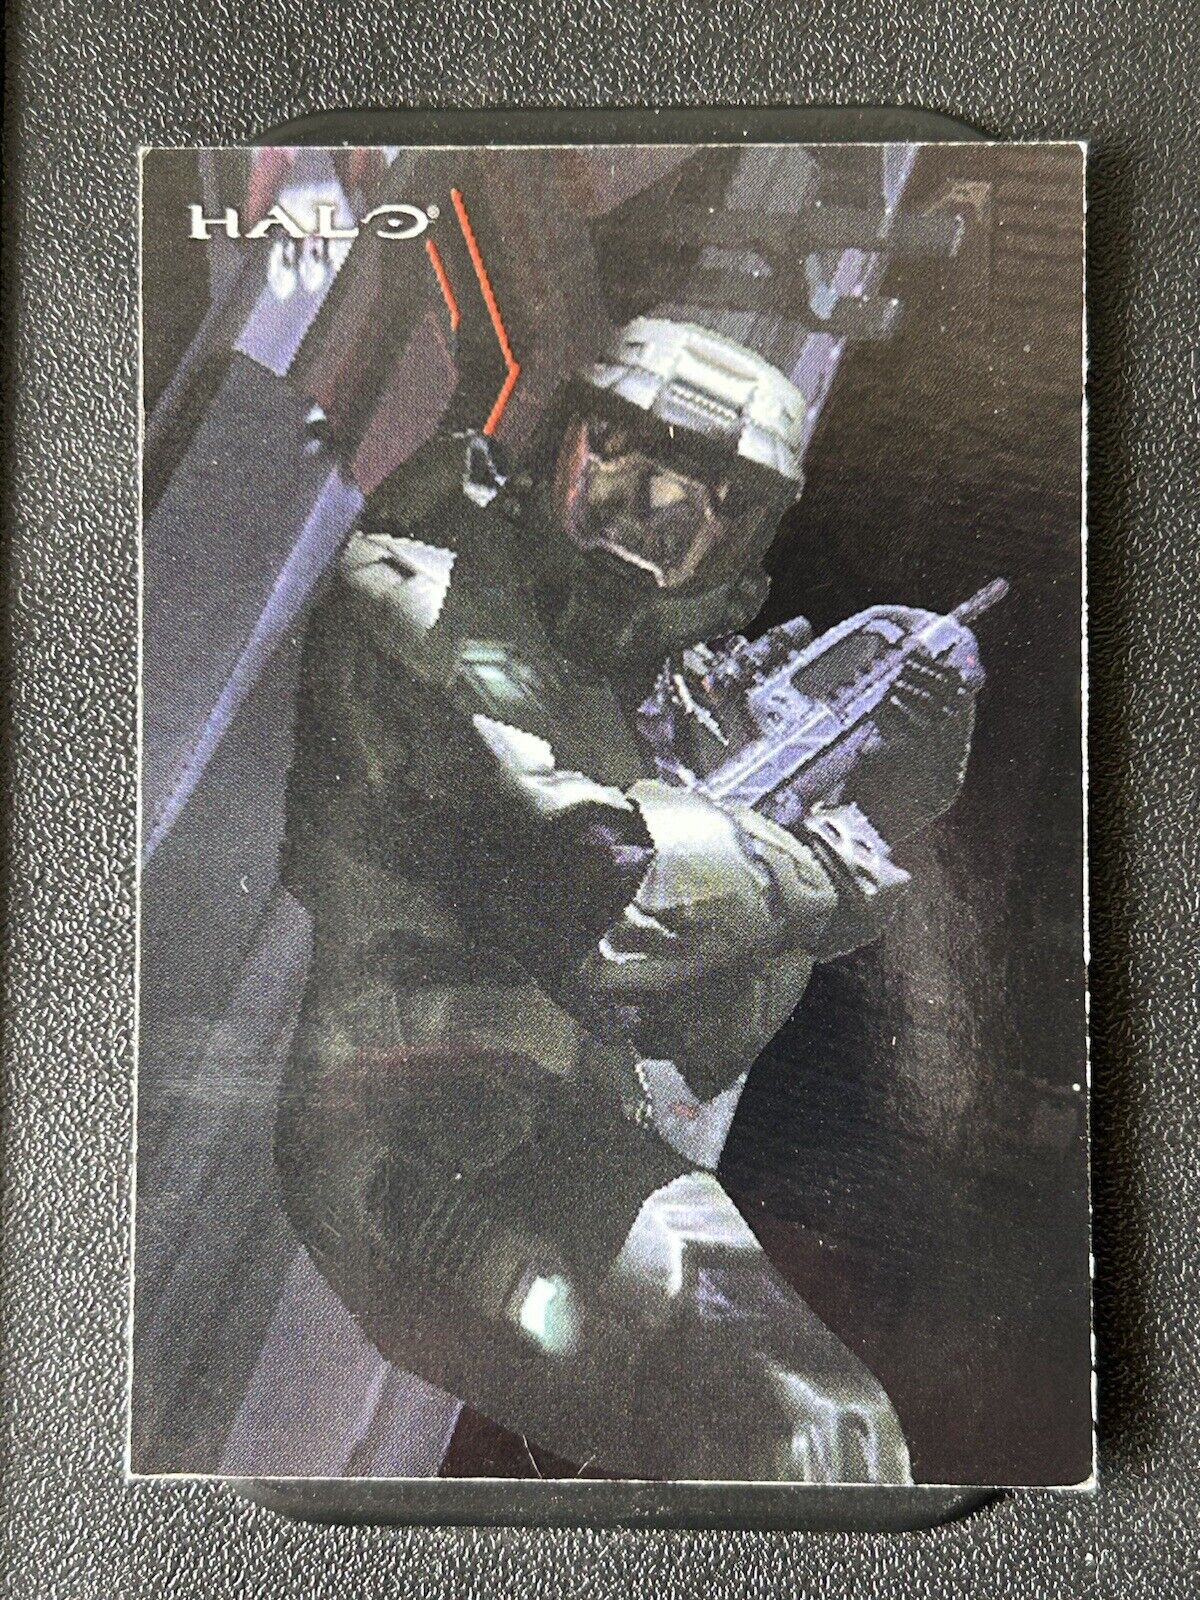 Halo 2007 Topps Foil Card 8 Of 10 MASTER CHIEF Low Grade